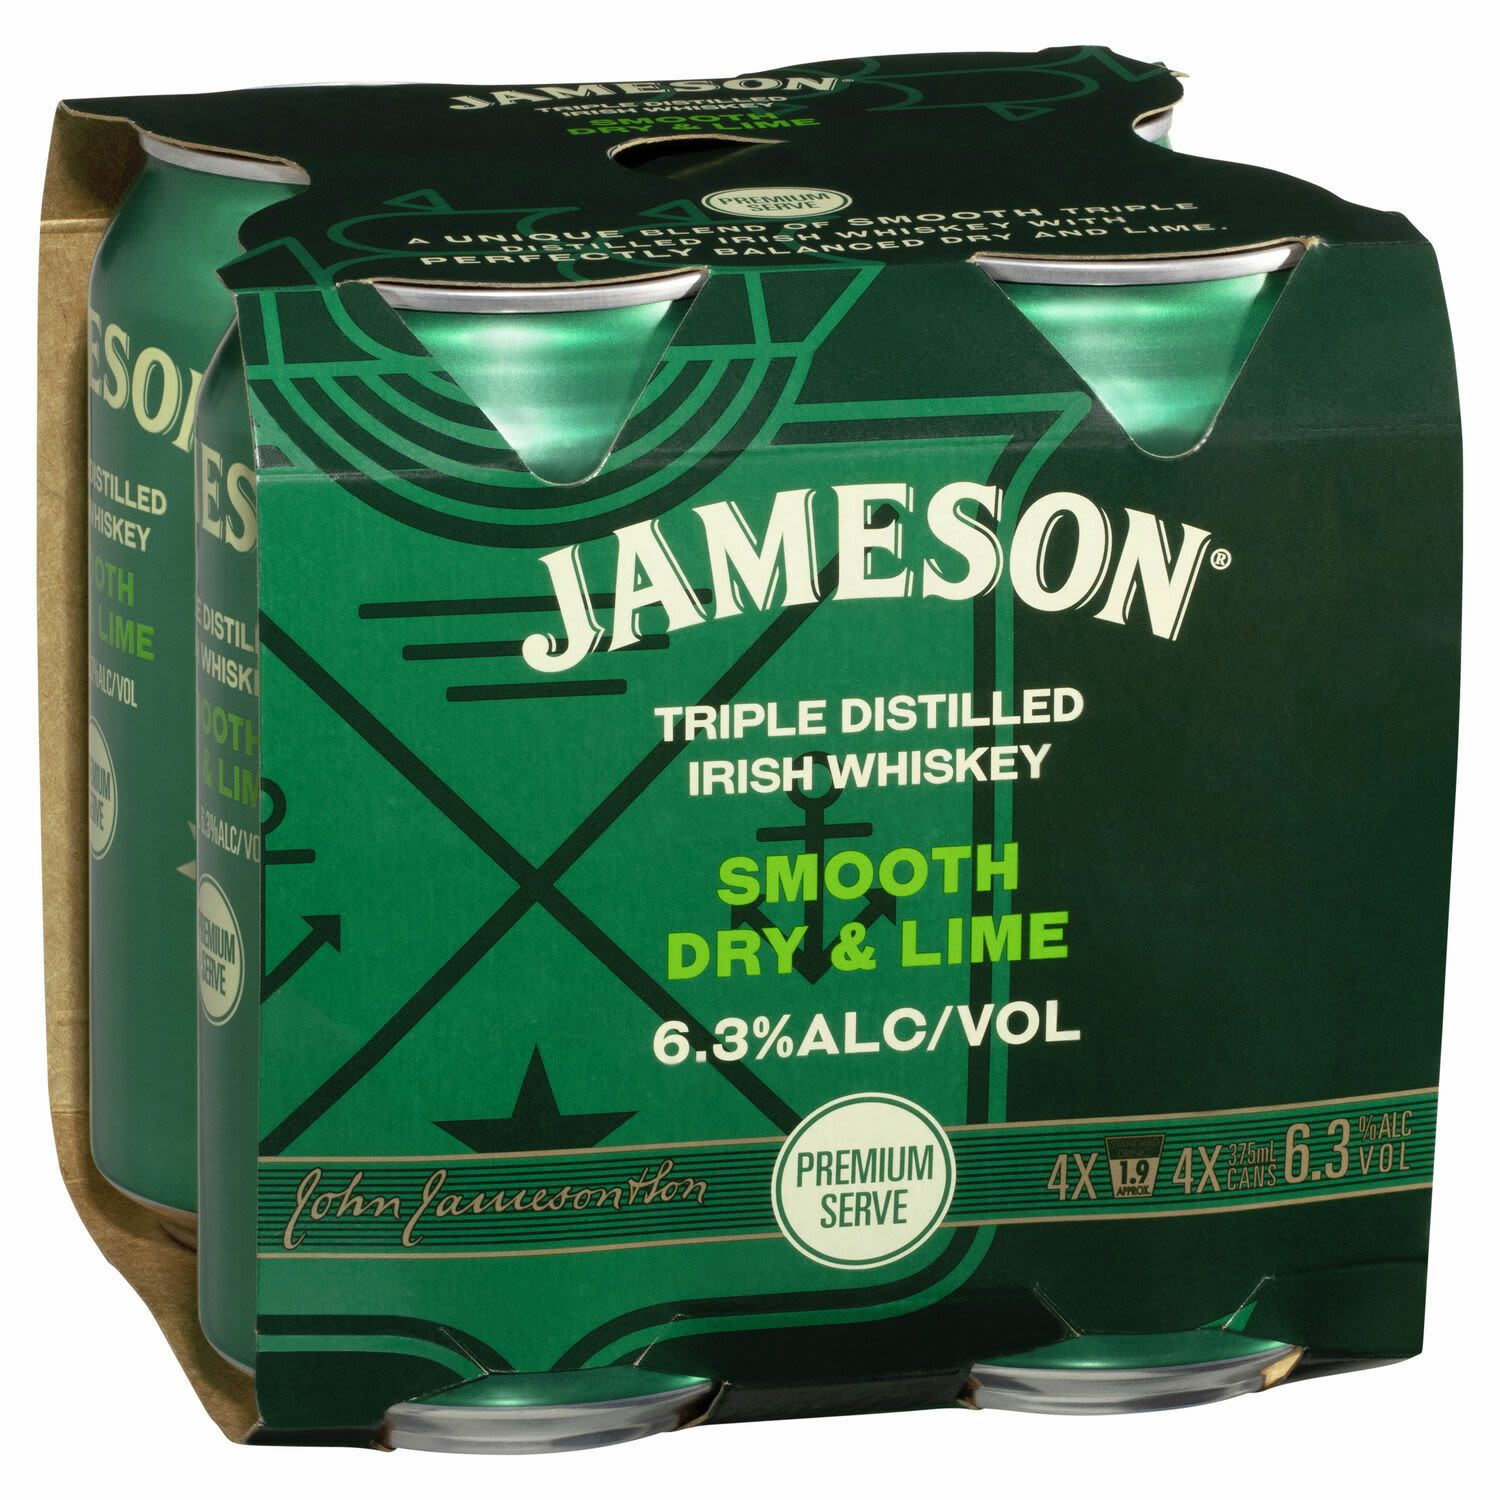 Jameson Triple Distilled Irish Whiskey Smooth Dry & Lime - Premium serve. A unique blend of smooth triple distilled Irish Whiskey with perfectly balanced dry and lime.<br /> <br />Alcohol Volume: 6.30%<br /><br />Pack Format: 4 Pack<br /><br />Standard Drinks: 1.9</br /><br />Pack Type: Can<br />